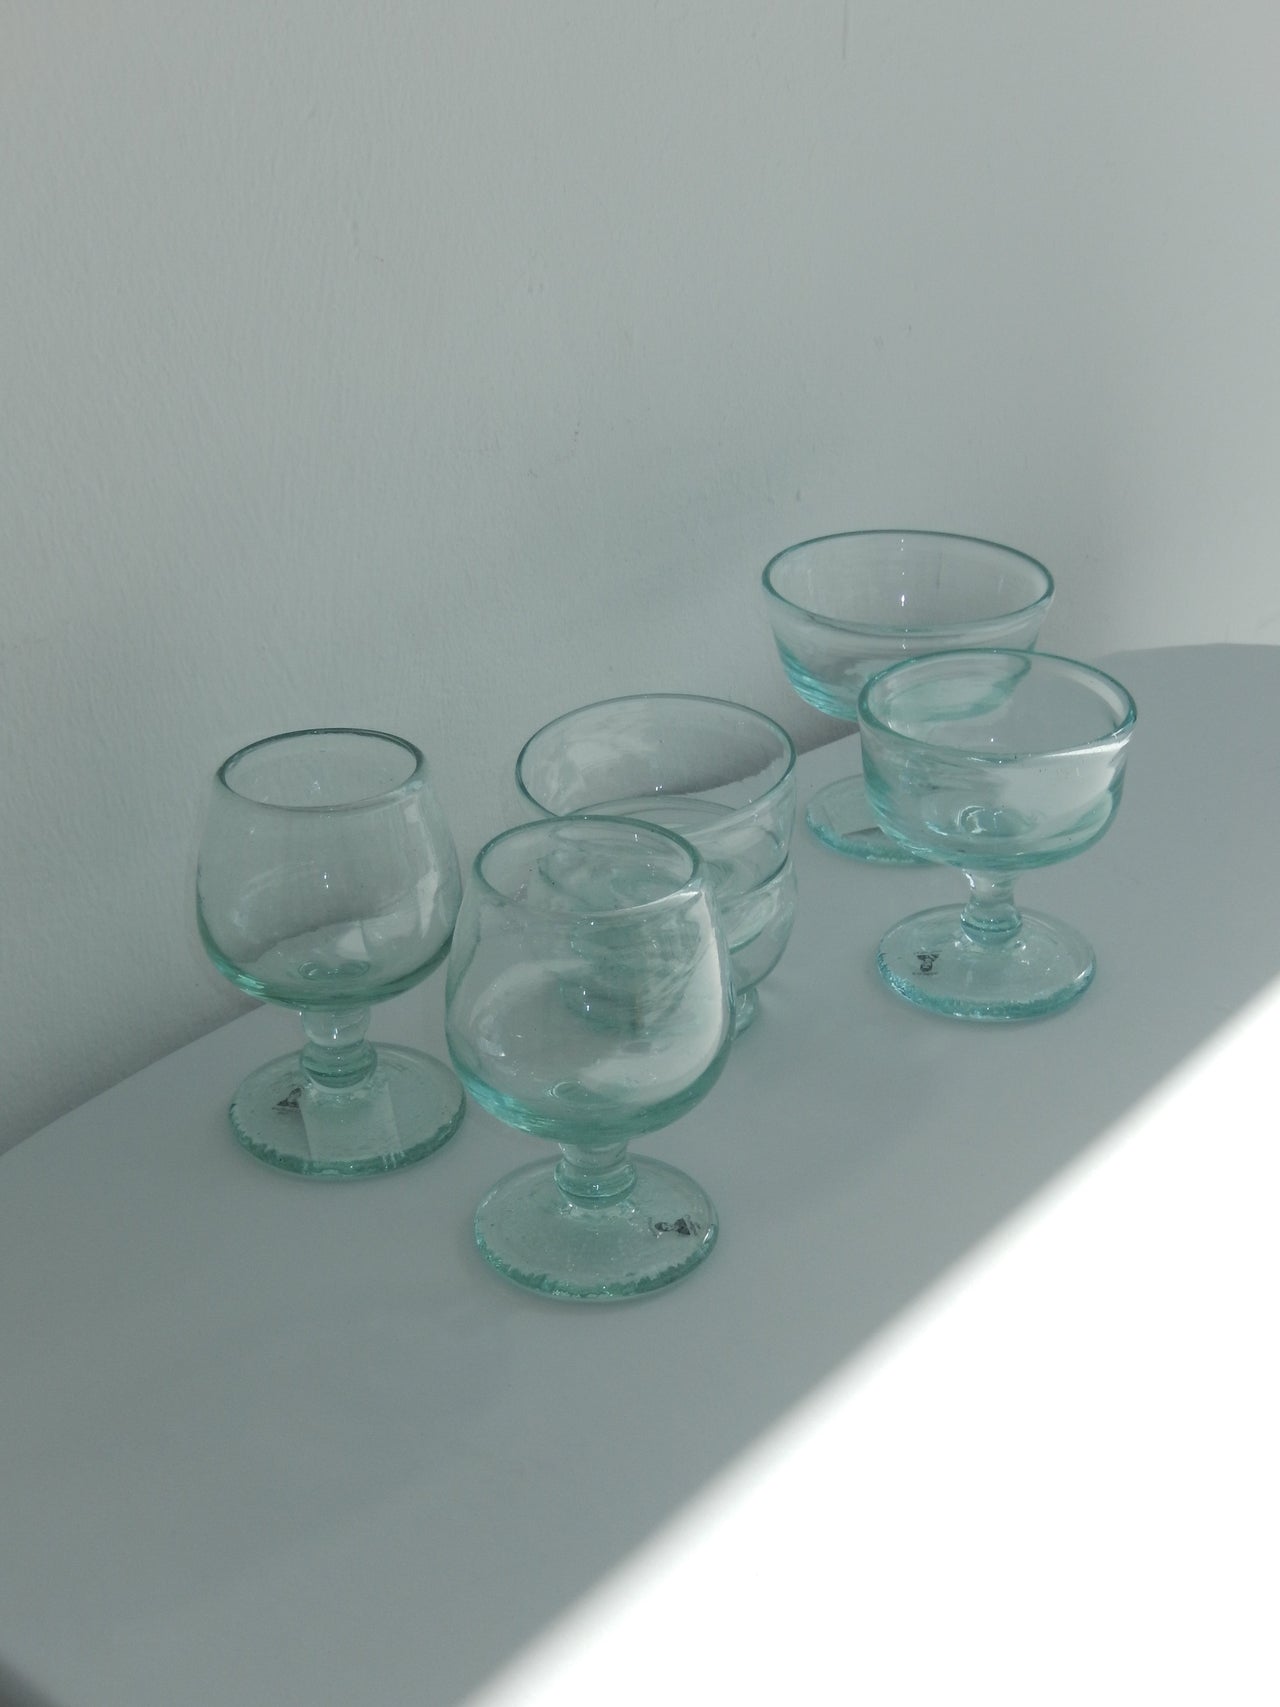 Coppa - La Soufflerie - Hand blown from recycled glass